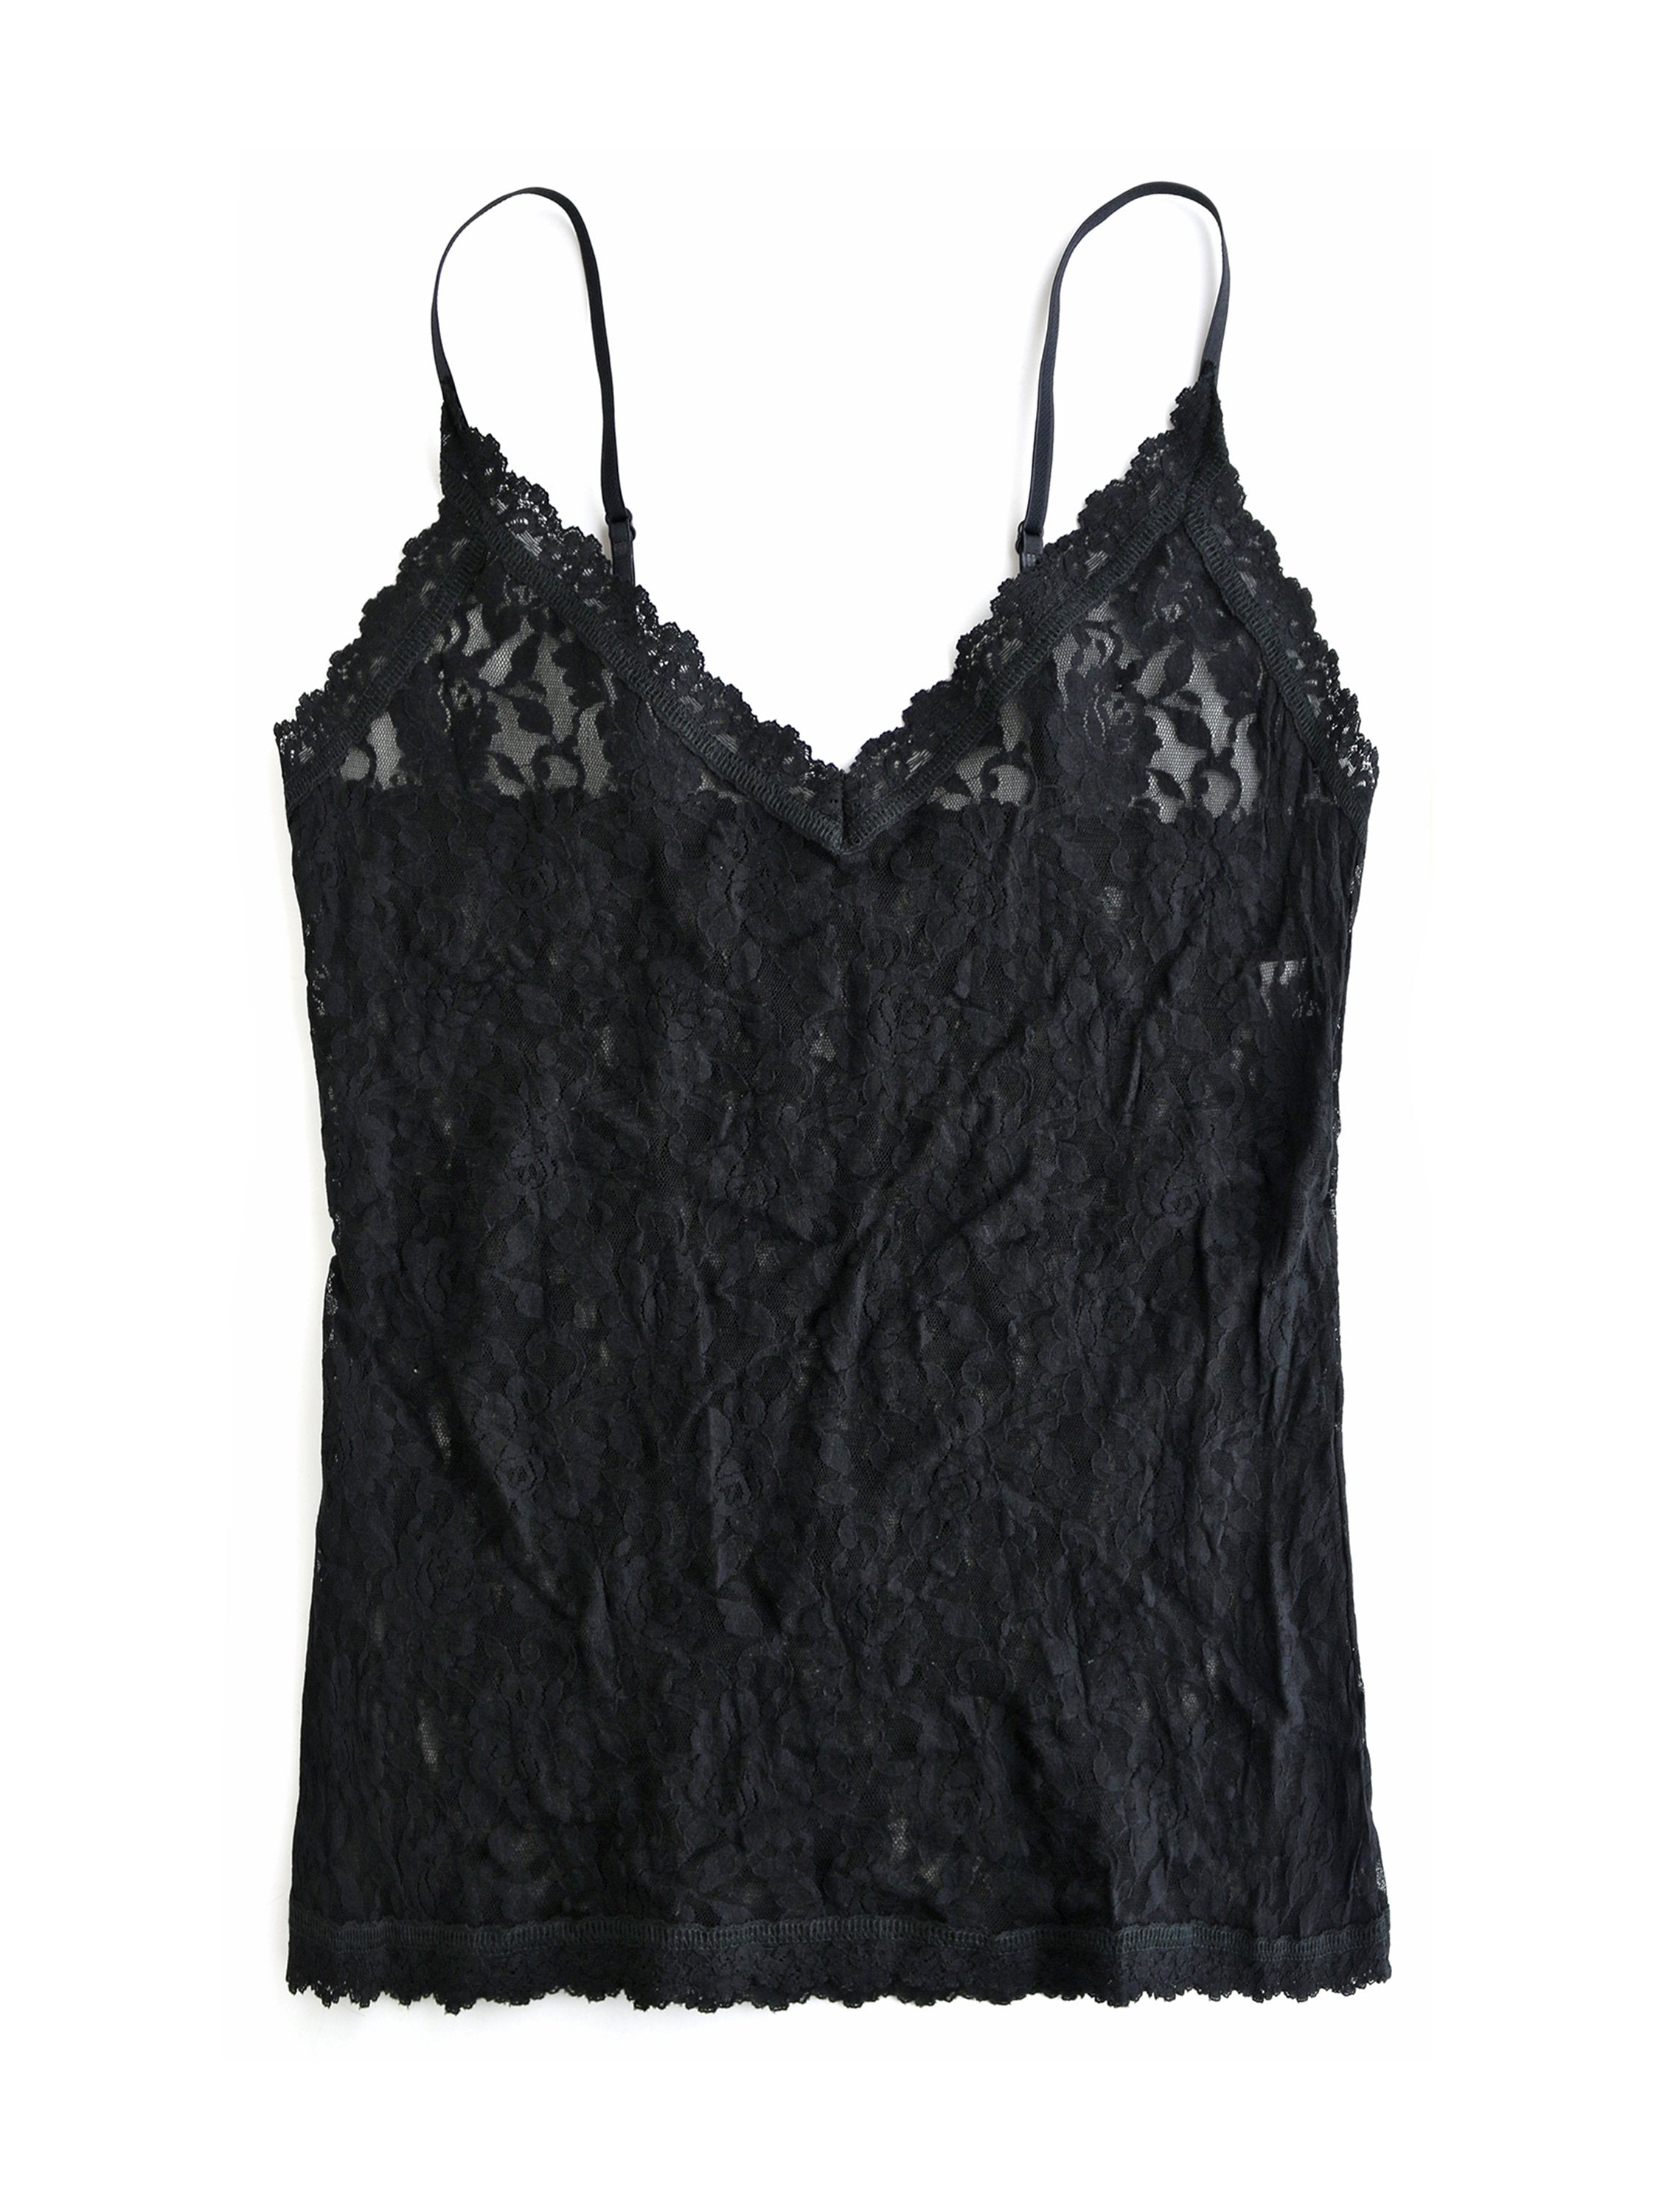 A Peek Behind the Lace Cami